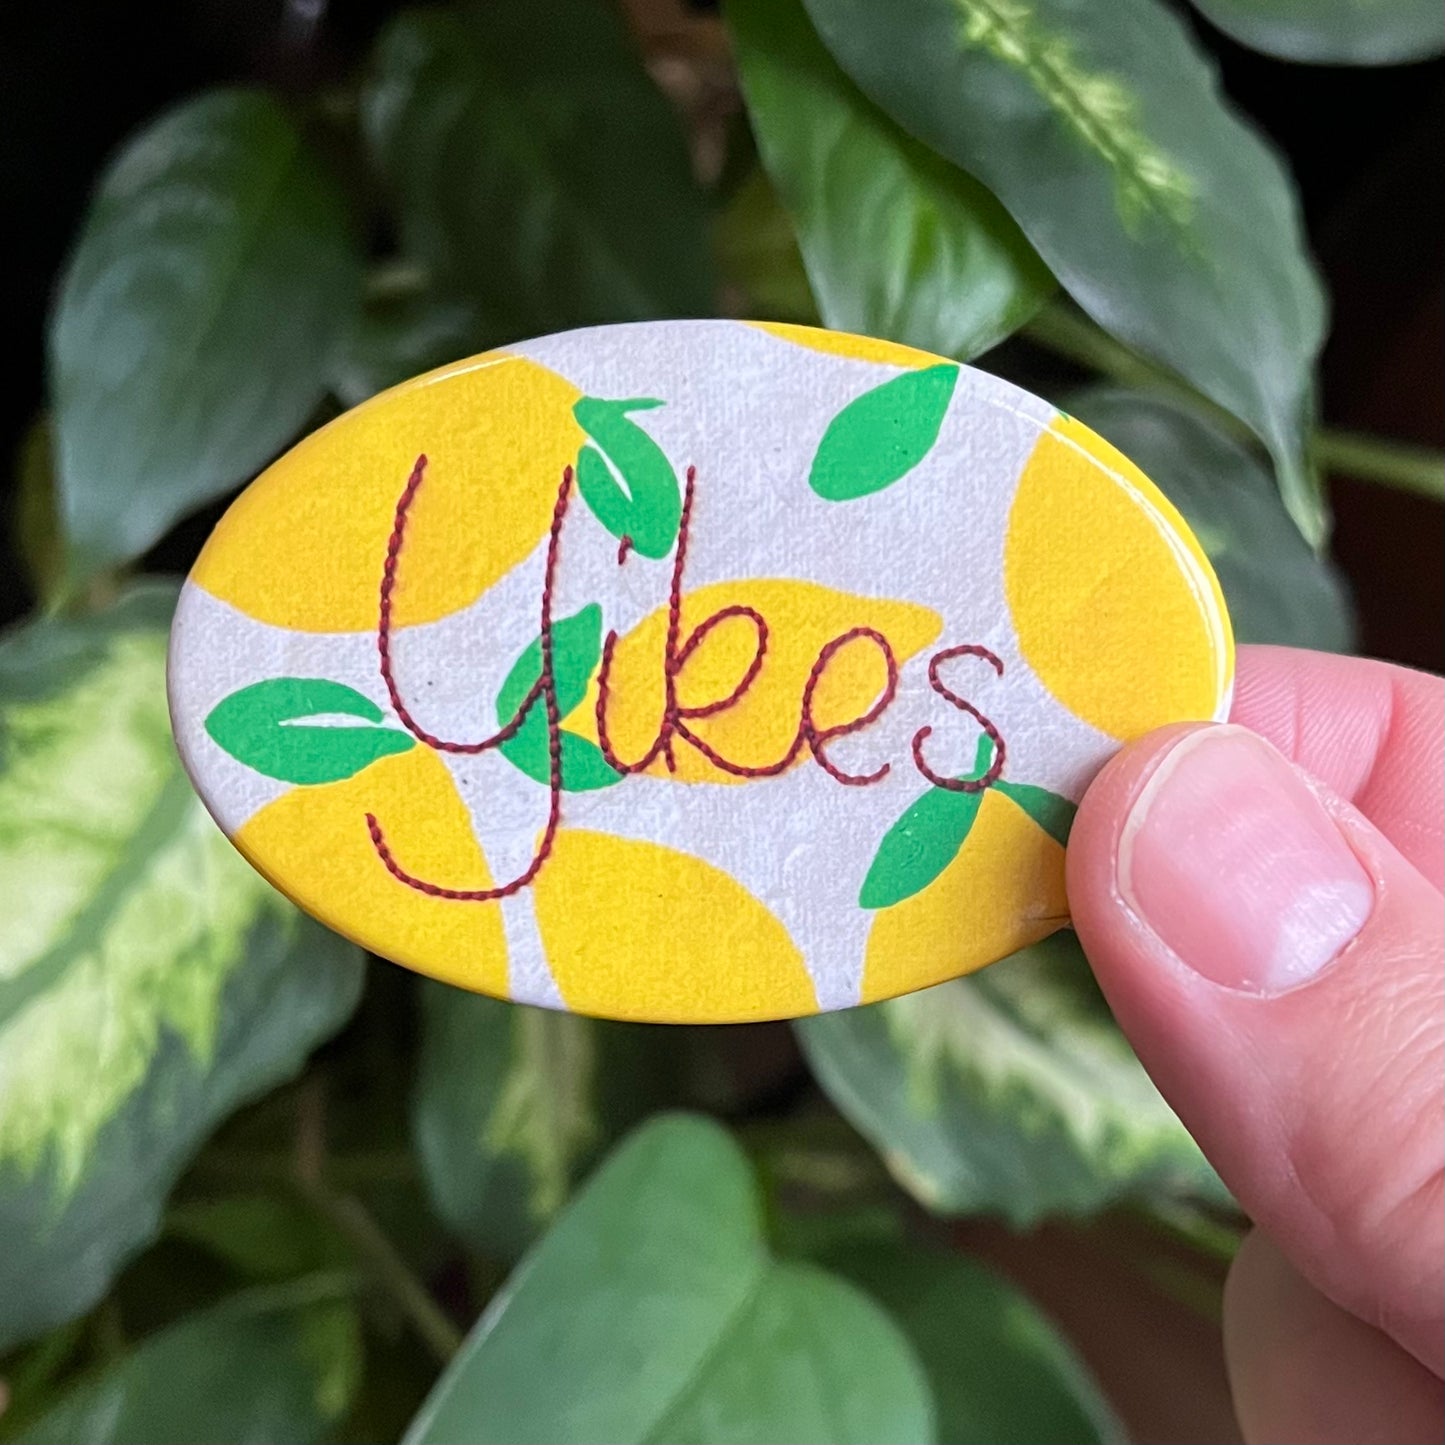 Yikes Embroidery Inspired Oval Button